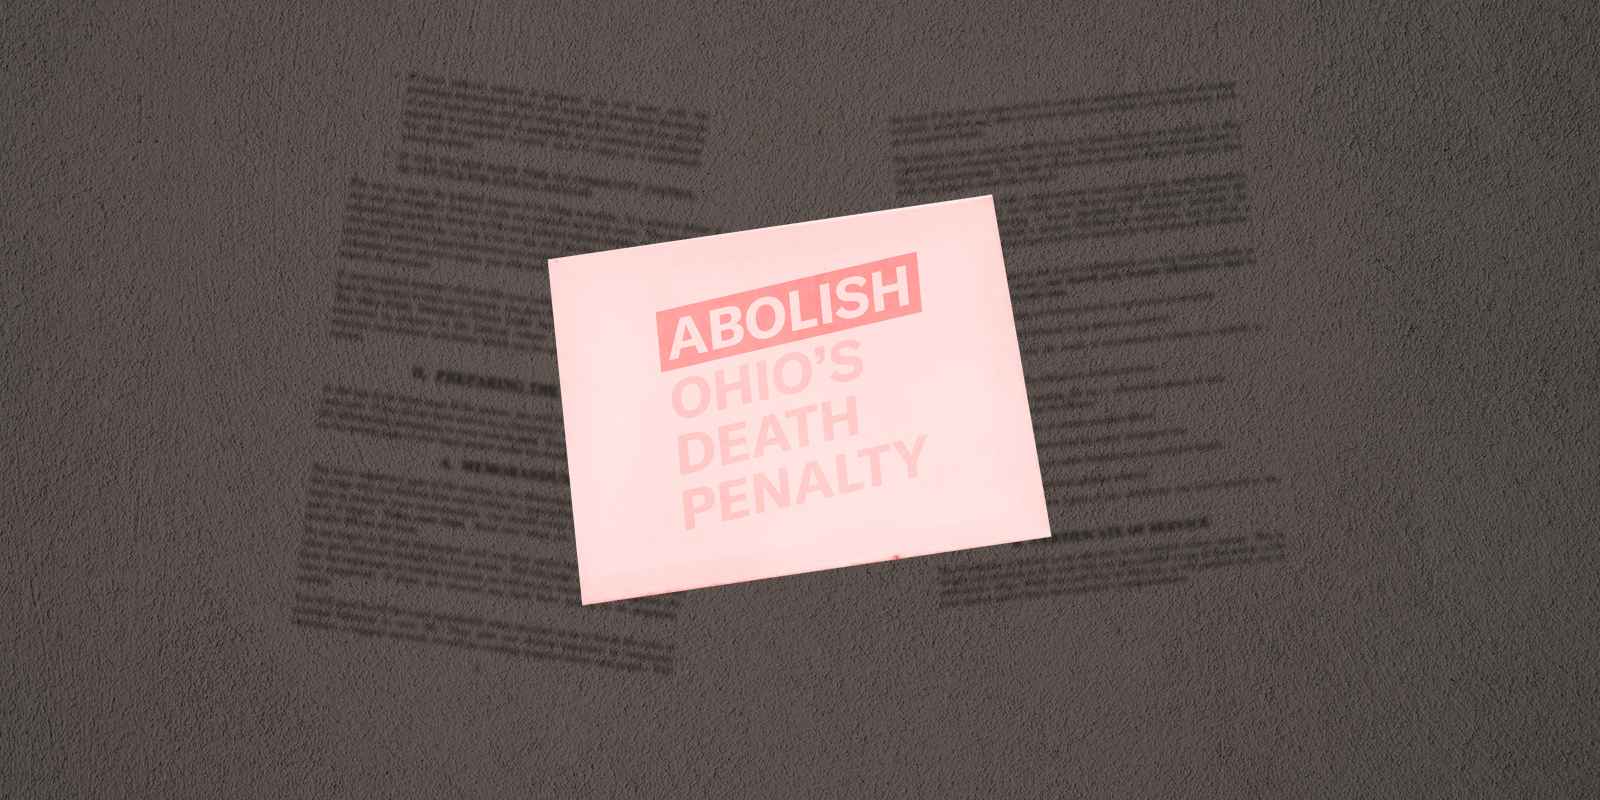 A sign that reads 'Abolish Ohio's Death Penalty' on a textured grey background